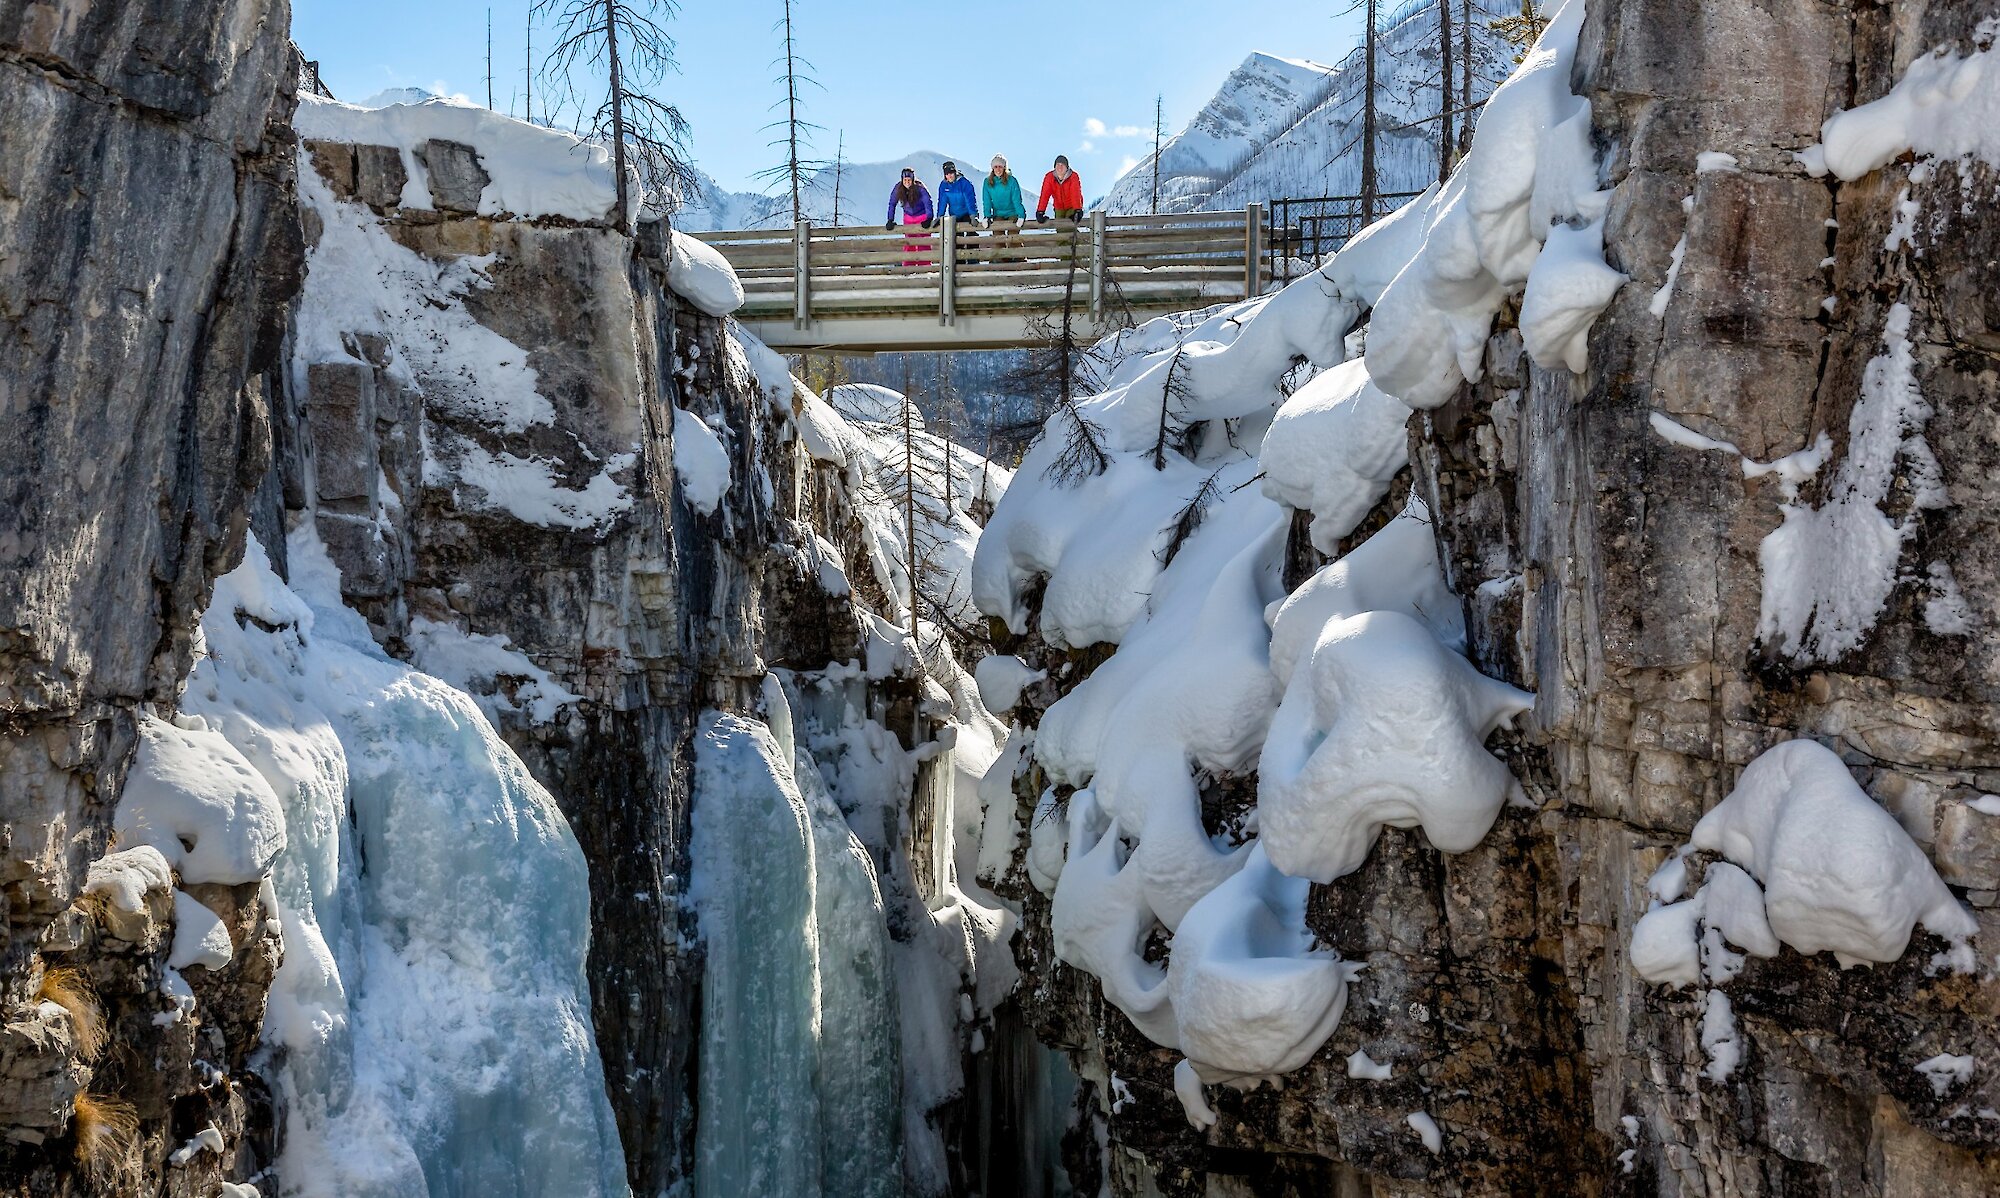 People on a bridge overlooking the Marble canyon in the winter